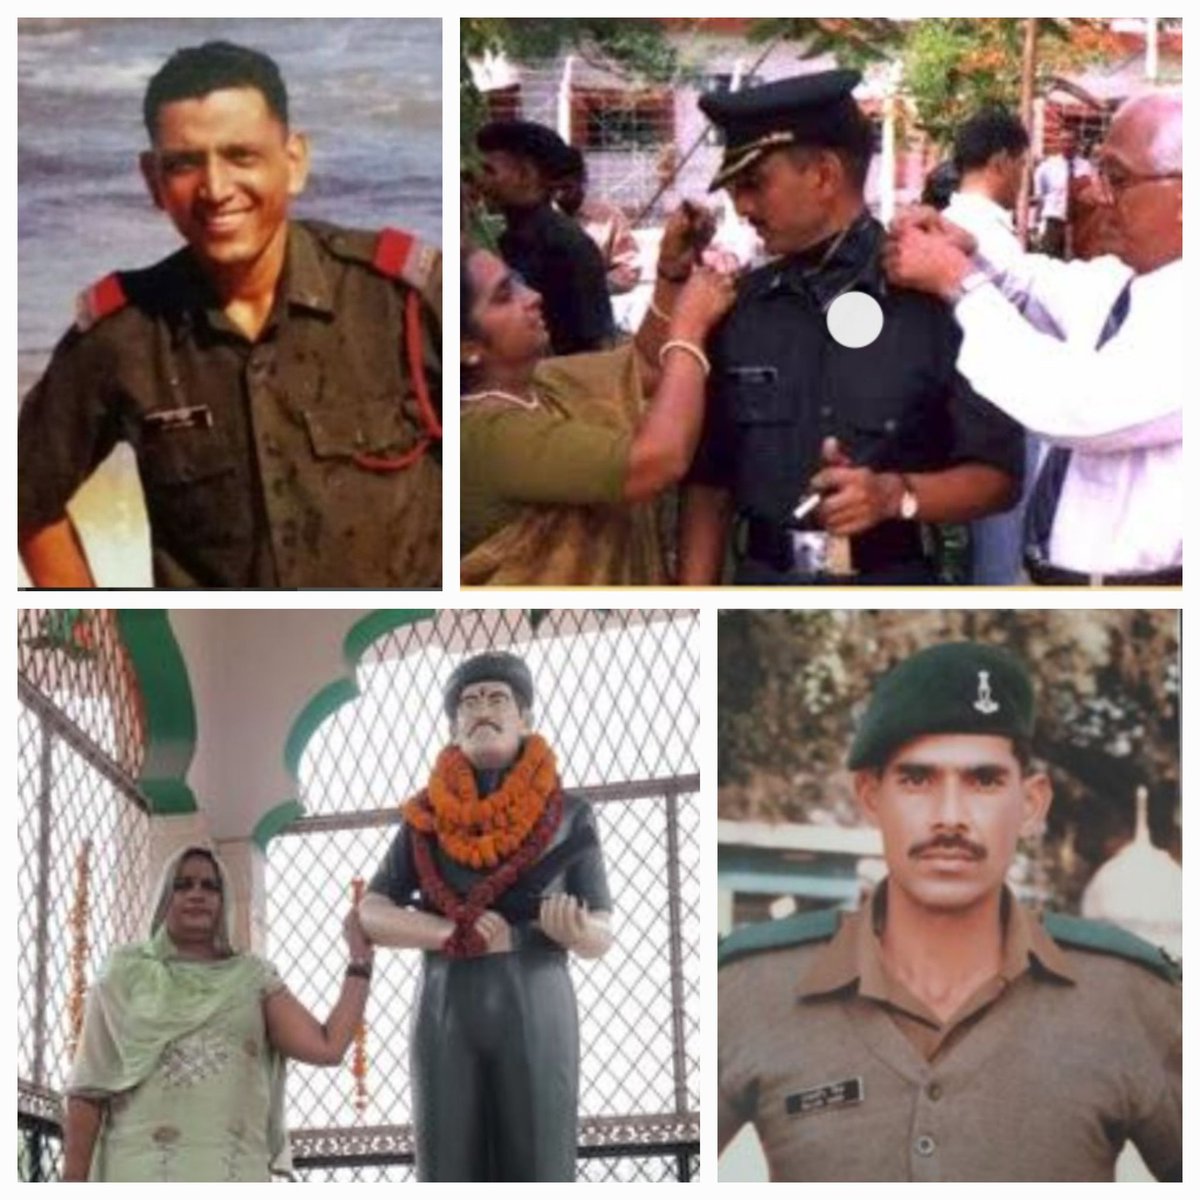 This day, #KnowOurHeroes and the ethos of Indian Army 🇮🇳 When Lt Saurabh Kalia reported to 4 Jat after commission, his immediate senior, young Capt Amit Bharadwaj, was very happy he was no longer the 'juniormost' After Capt Saurabh Kalia's patrol went missing, Capt Amit led a